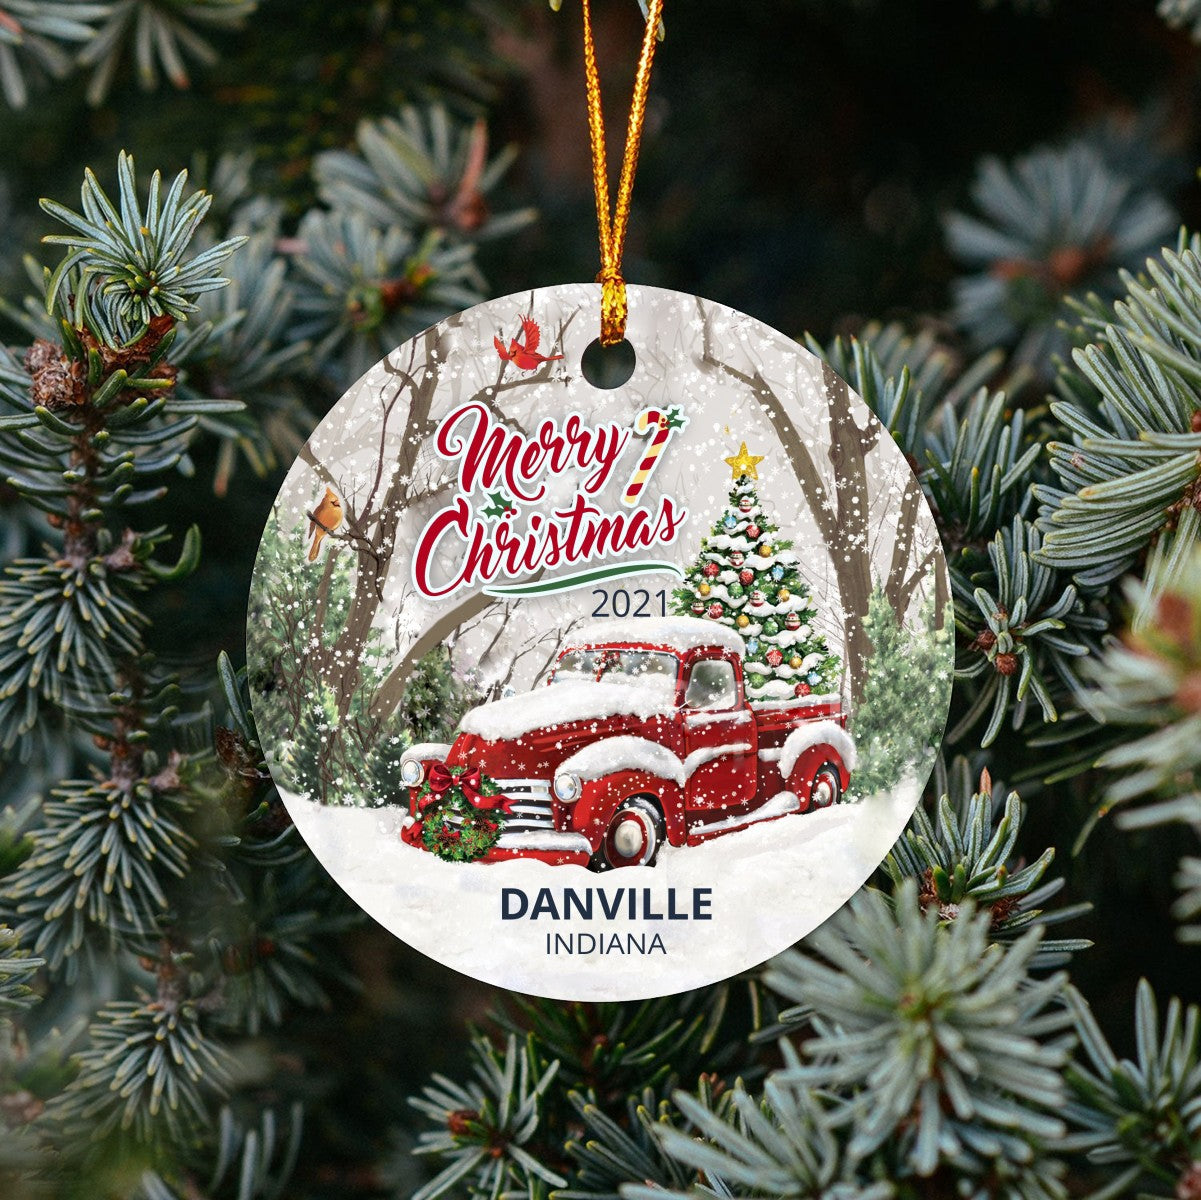 Christmas Tree Ornaments Danville - Ornament Customize With Name City And State Danville Indiana IN - Red Truck Xmas Ornaments 3'' Plastic Gift For Family, Friend And Housewarming